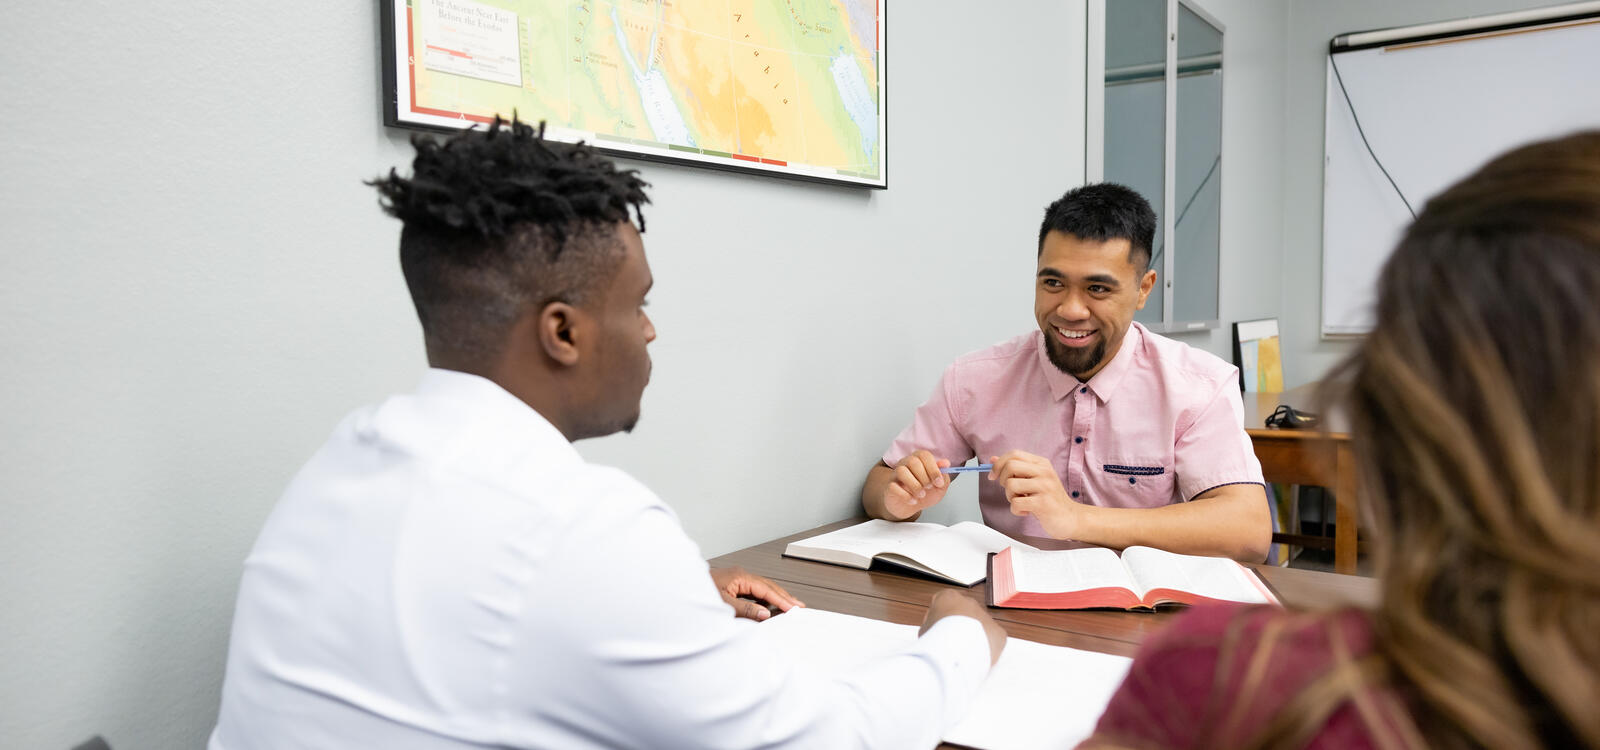 A male student smiles at another male student as they study the bible together.